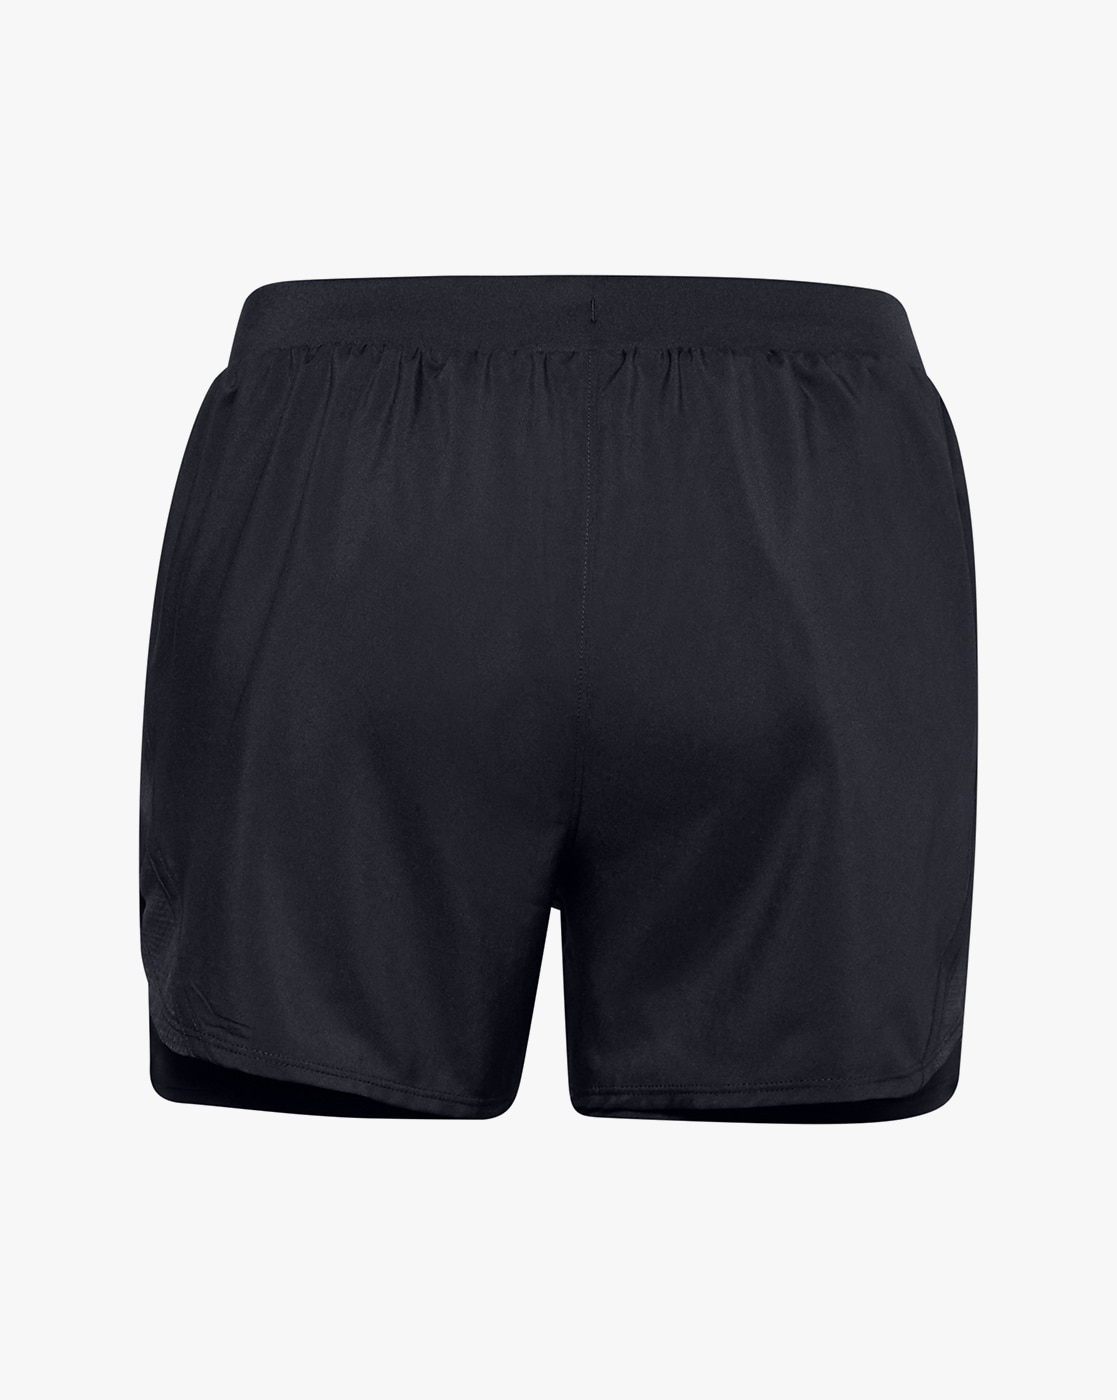 Buy Black Shorts for Women by Under Armour Online